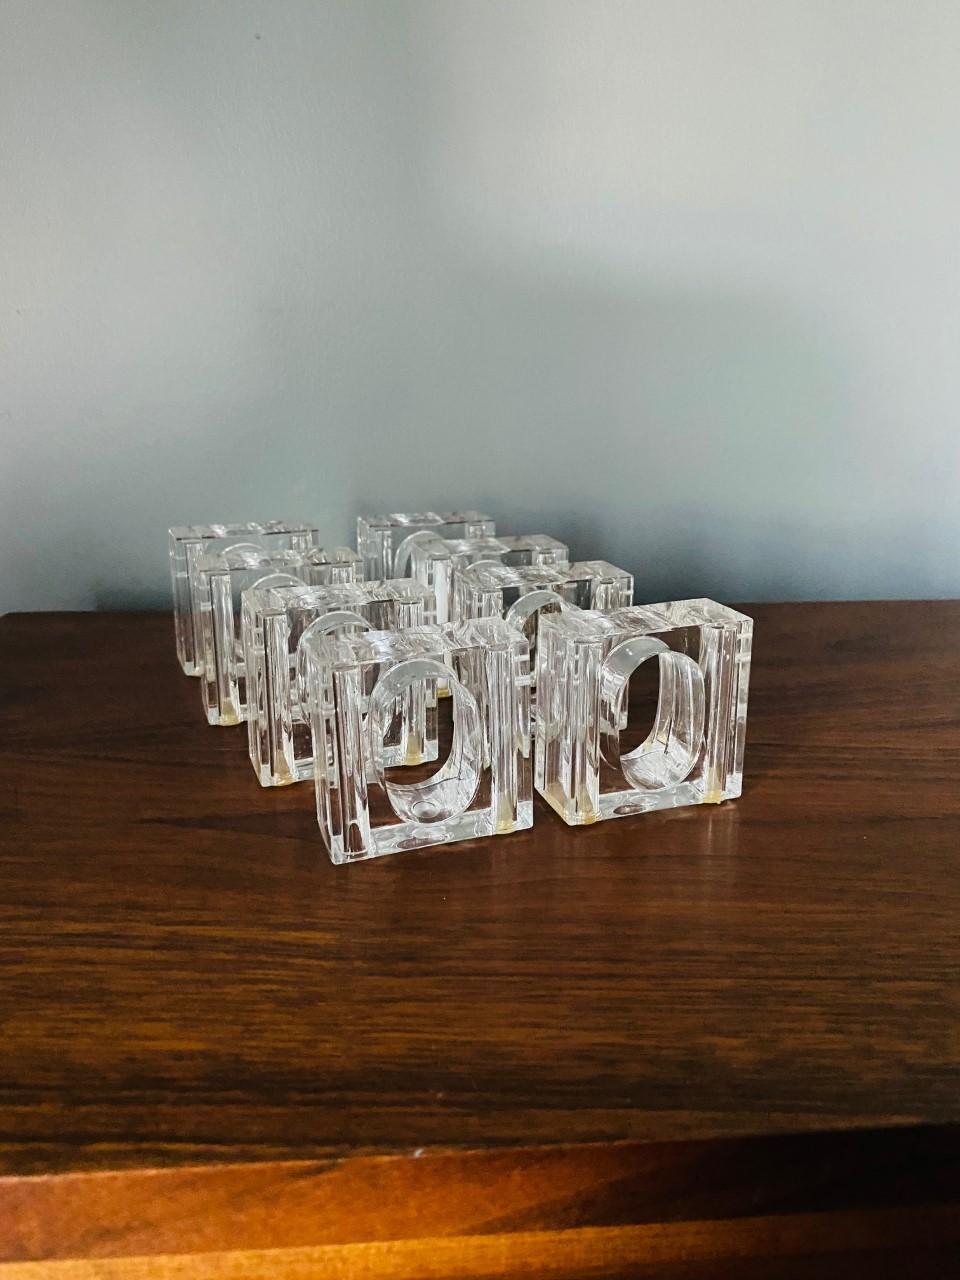 Beautiful 8 piece set of Mid-Century Modern lucite napkin holders. These novelty vintage pieces also perform as individual salt and pepper shakers!  Each piece has a designated space to fill with salt and pepper and orifices to pour out.  Each piece